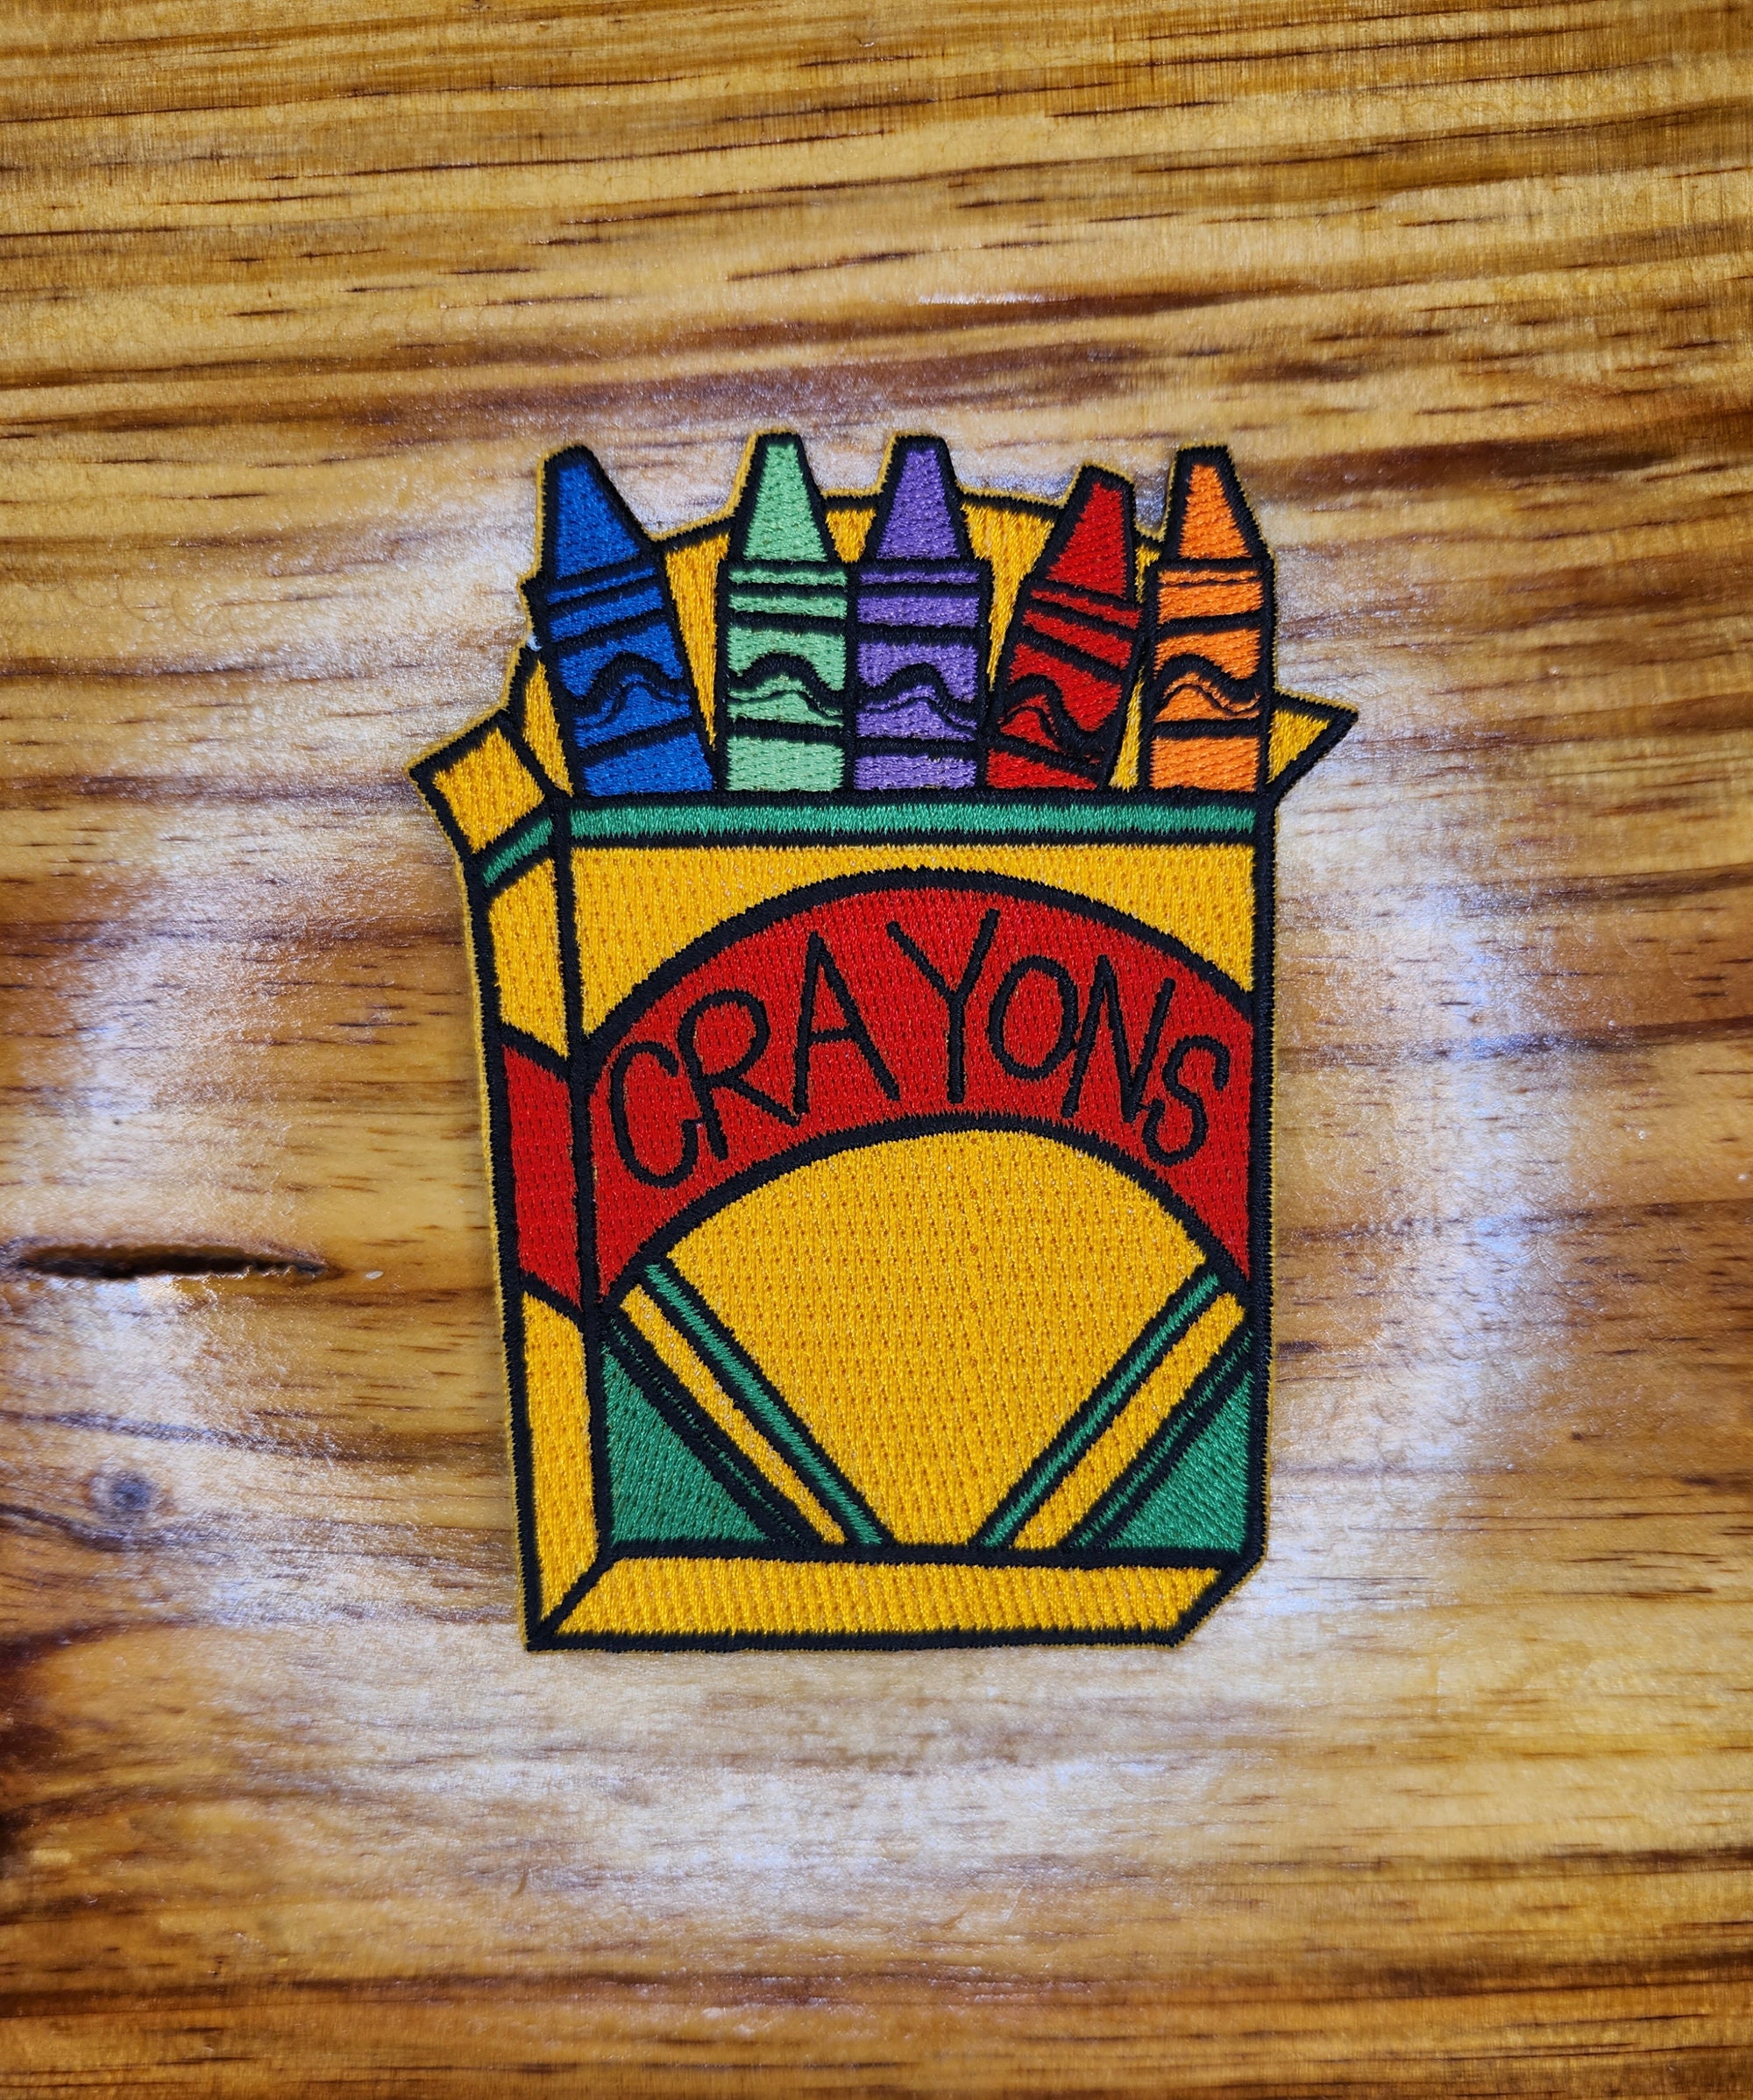 3 X 3.9375 Box of Crayons Iron on Patch, No Sewing Needed. 